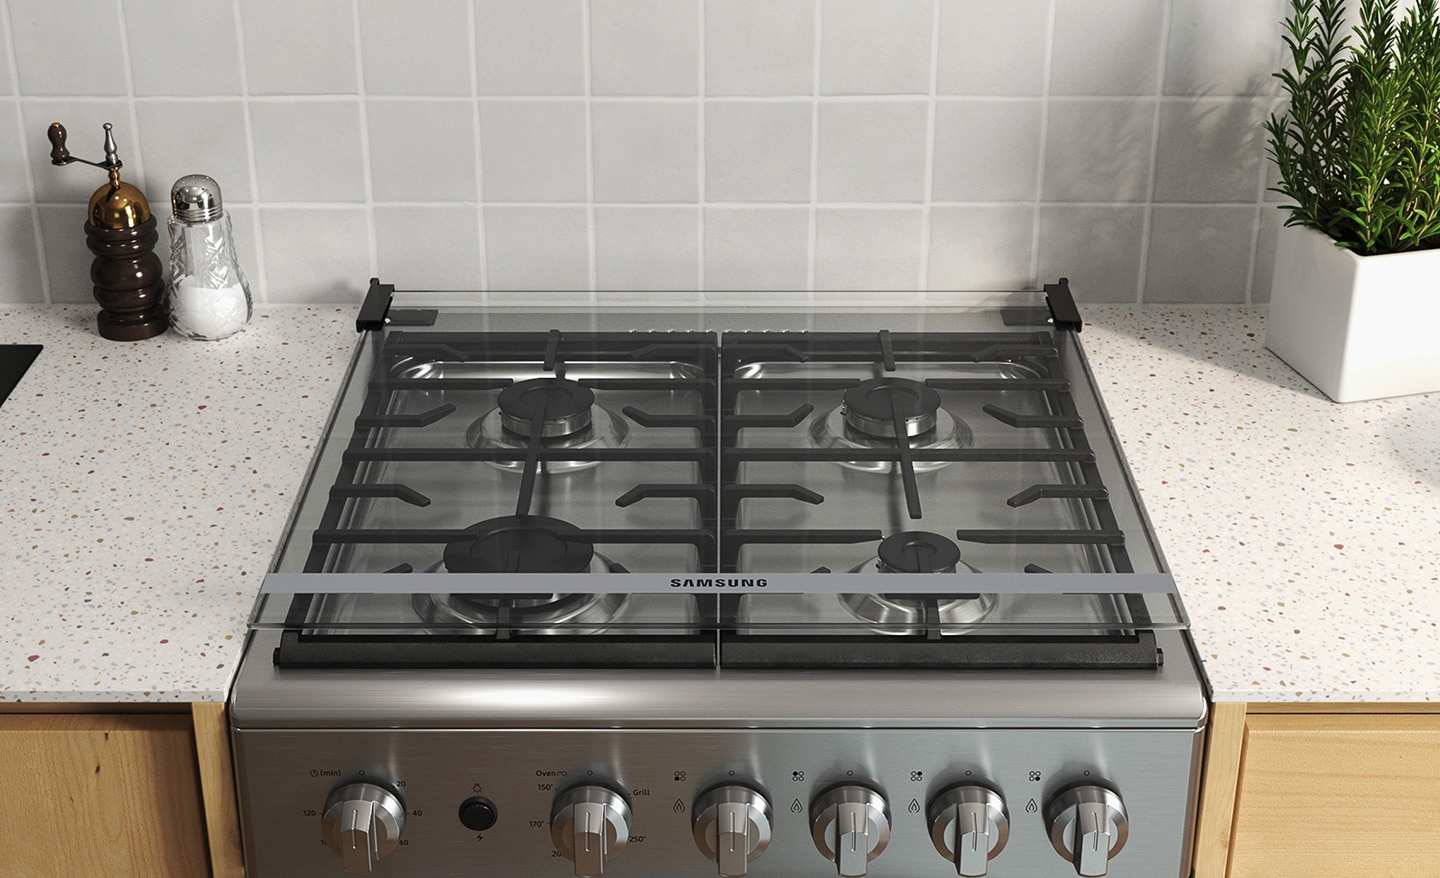 Shows the Tempered Cover Glass when it is down, covering the cooktop to protect it.